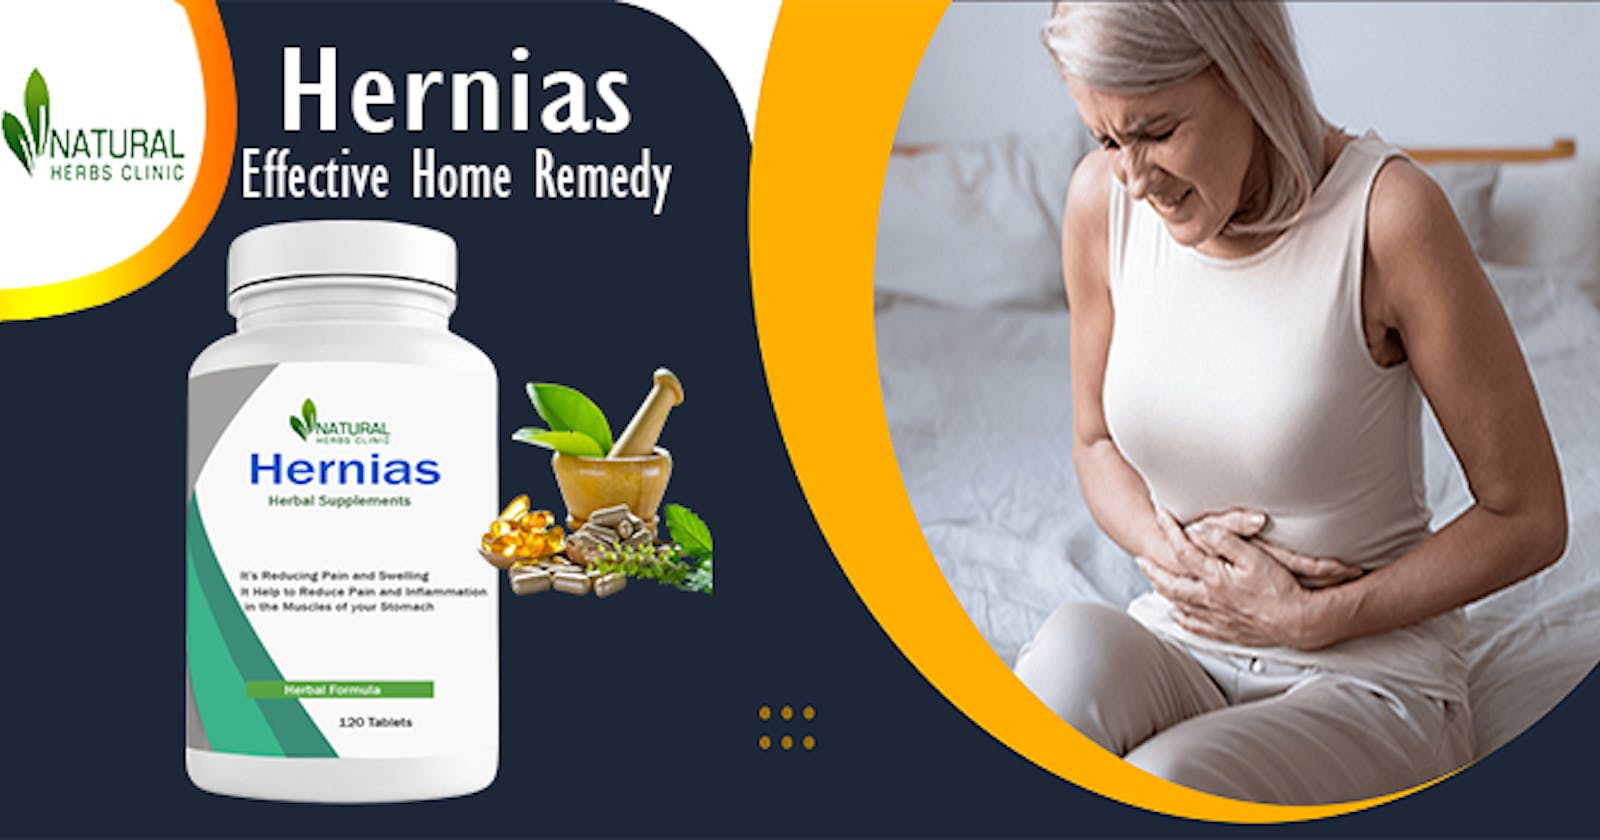 Effective Home Remedies for Hernias: Your Guide to Natural Healing